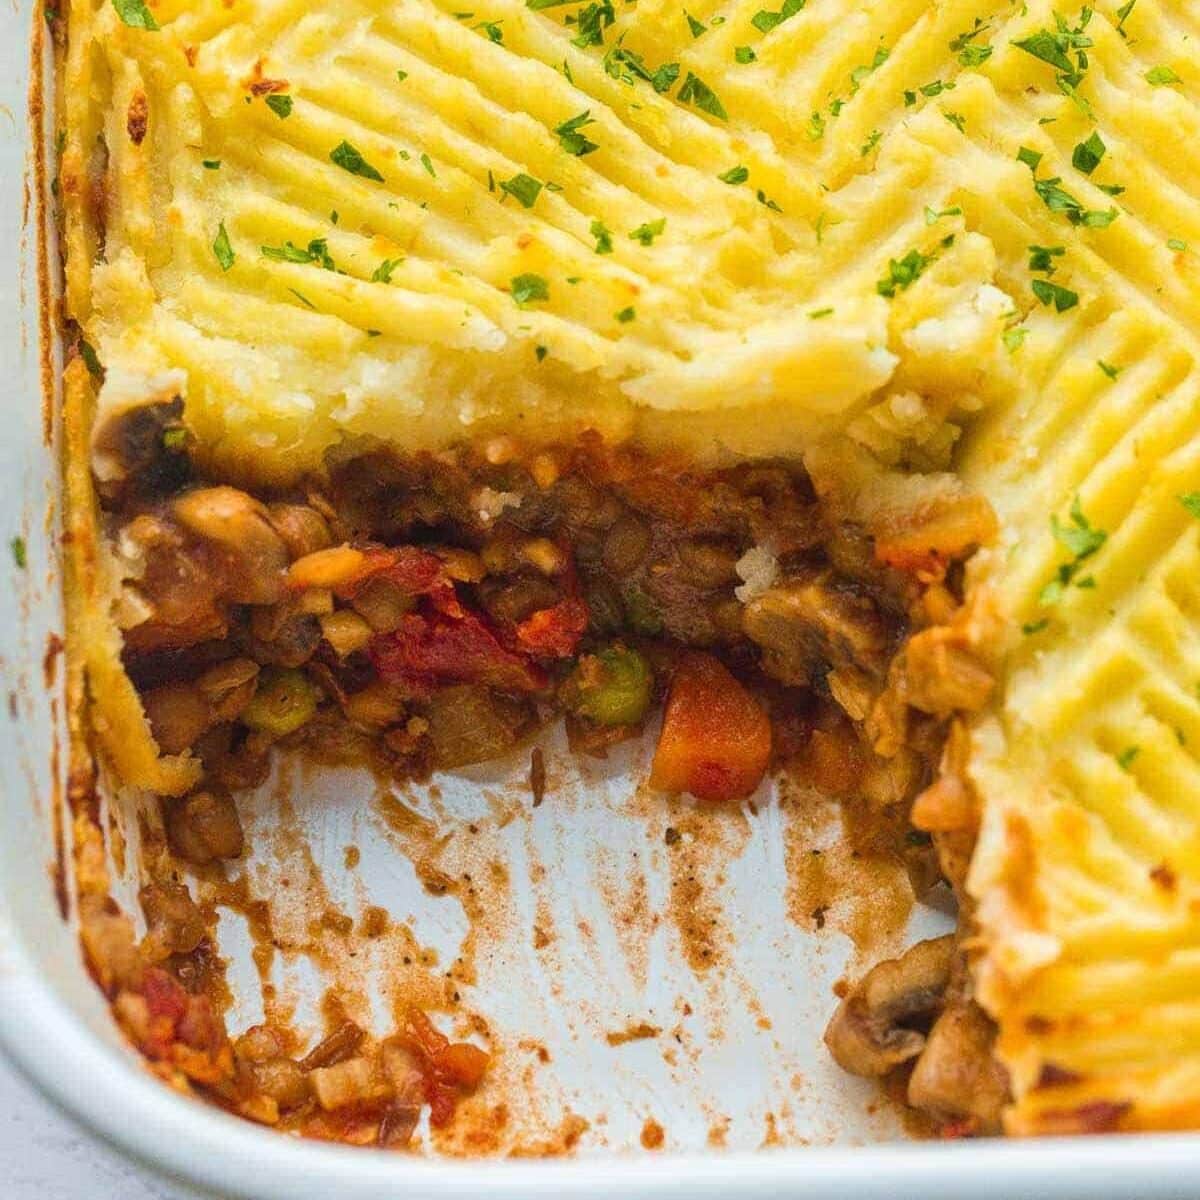 Dish of Vegan Shepherd's Pie with a serving taken out of it.